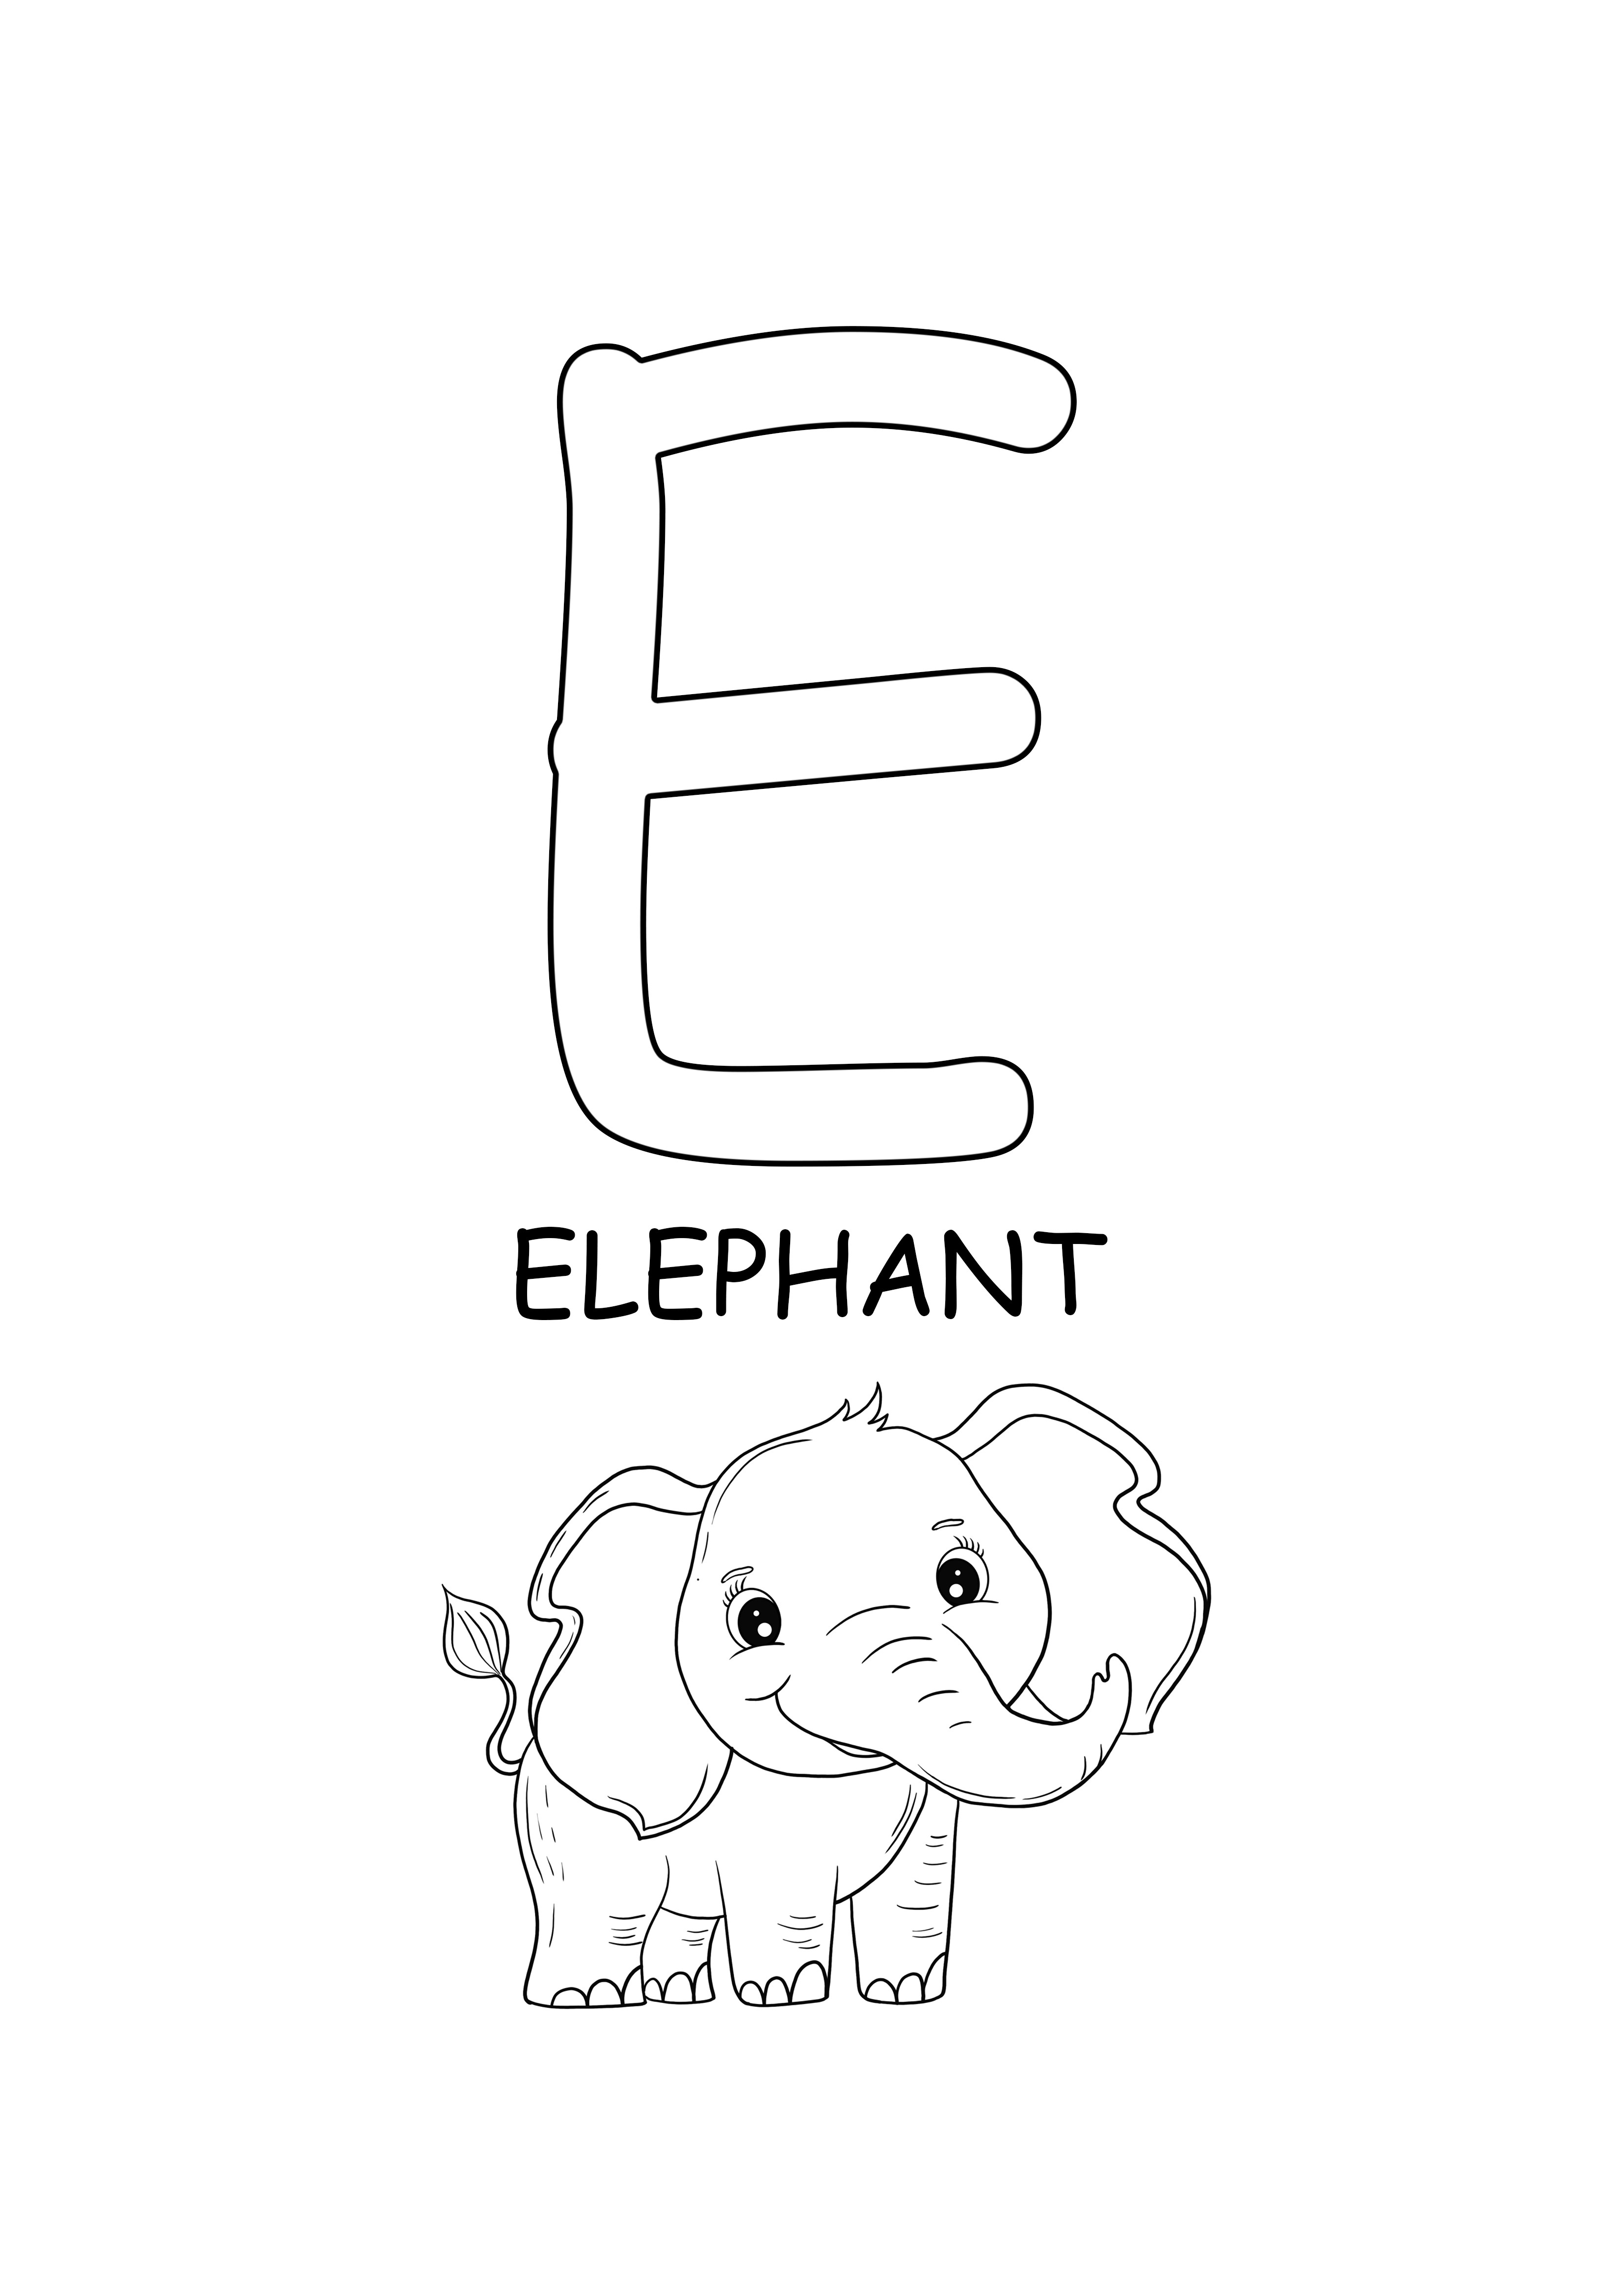 upper case word-elephant coloring and free printing word page